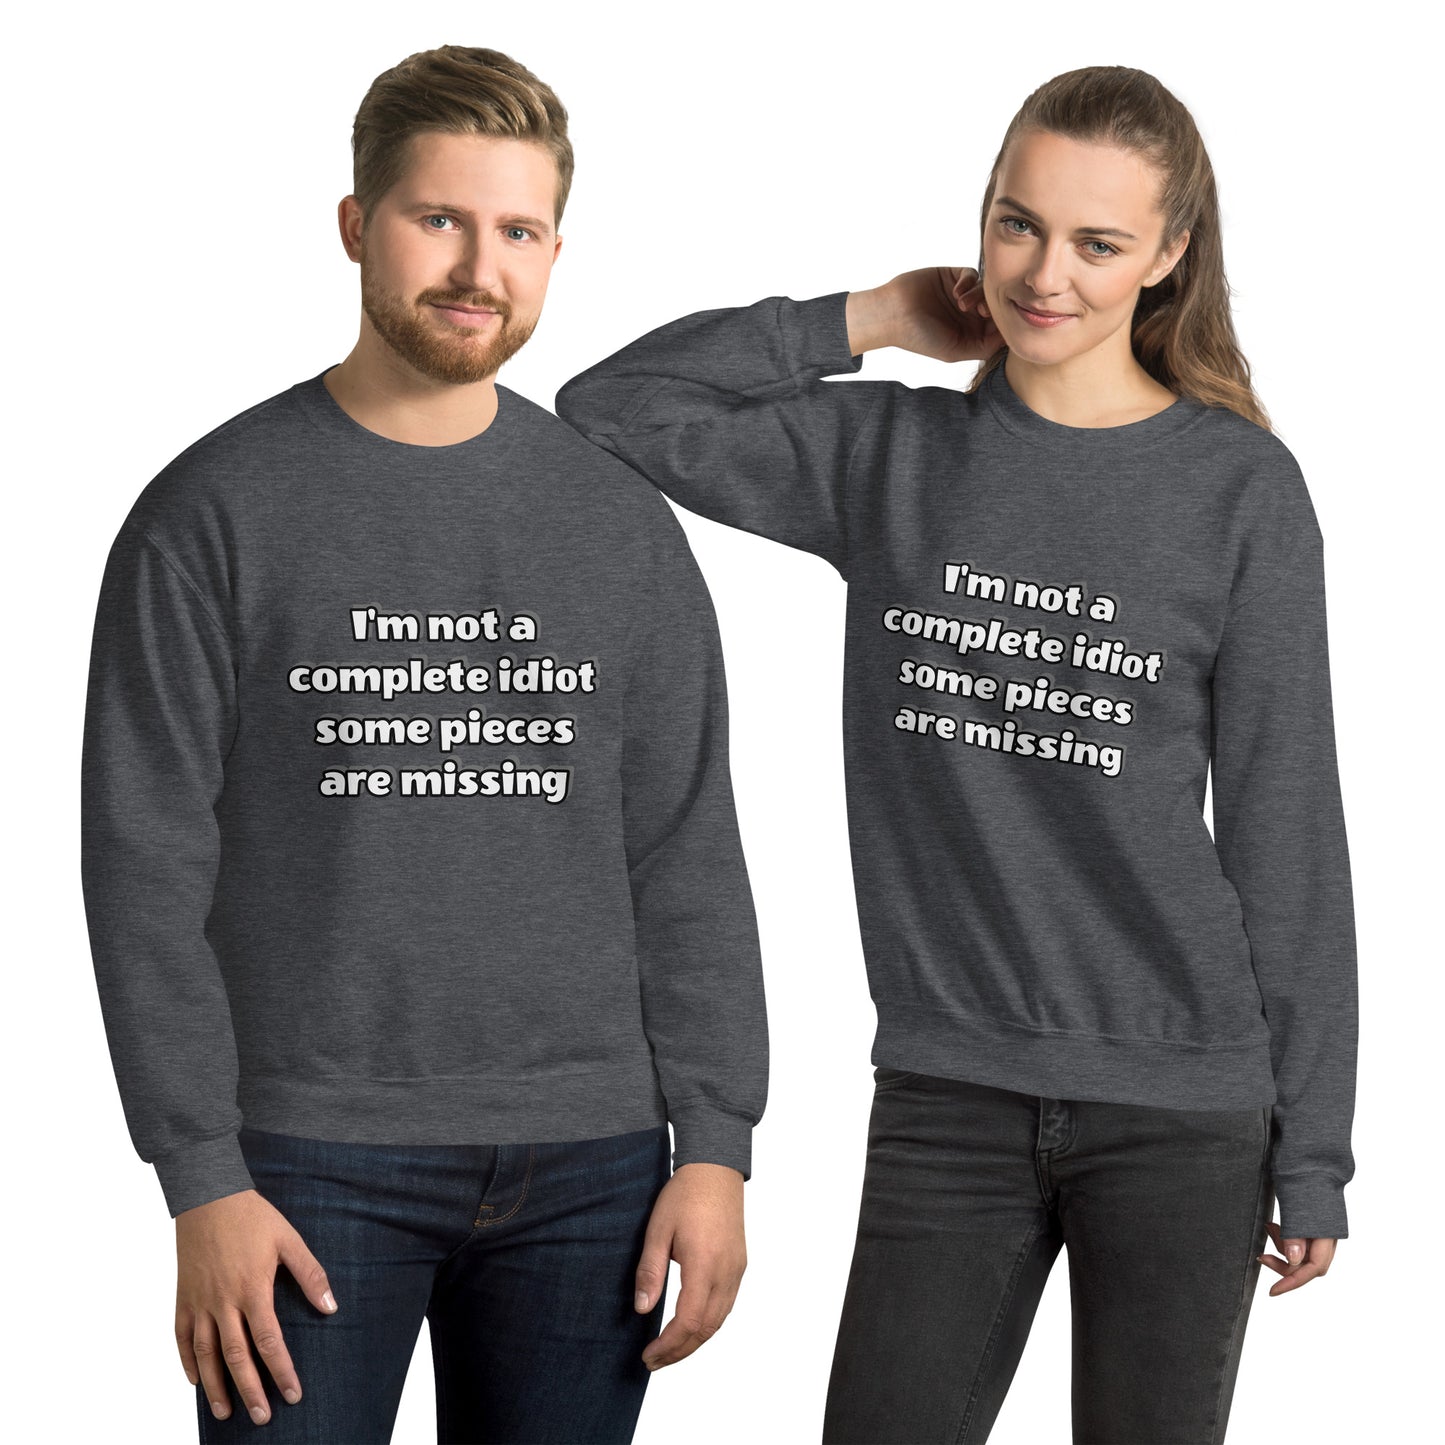 Man and women with dark grey sweatshirt with text “I’m not a complete idiot, some pieces are missing”